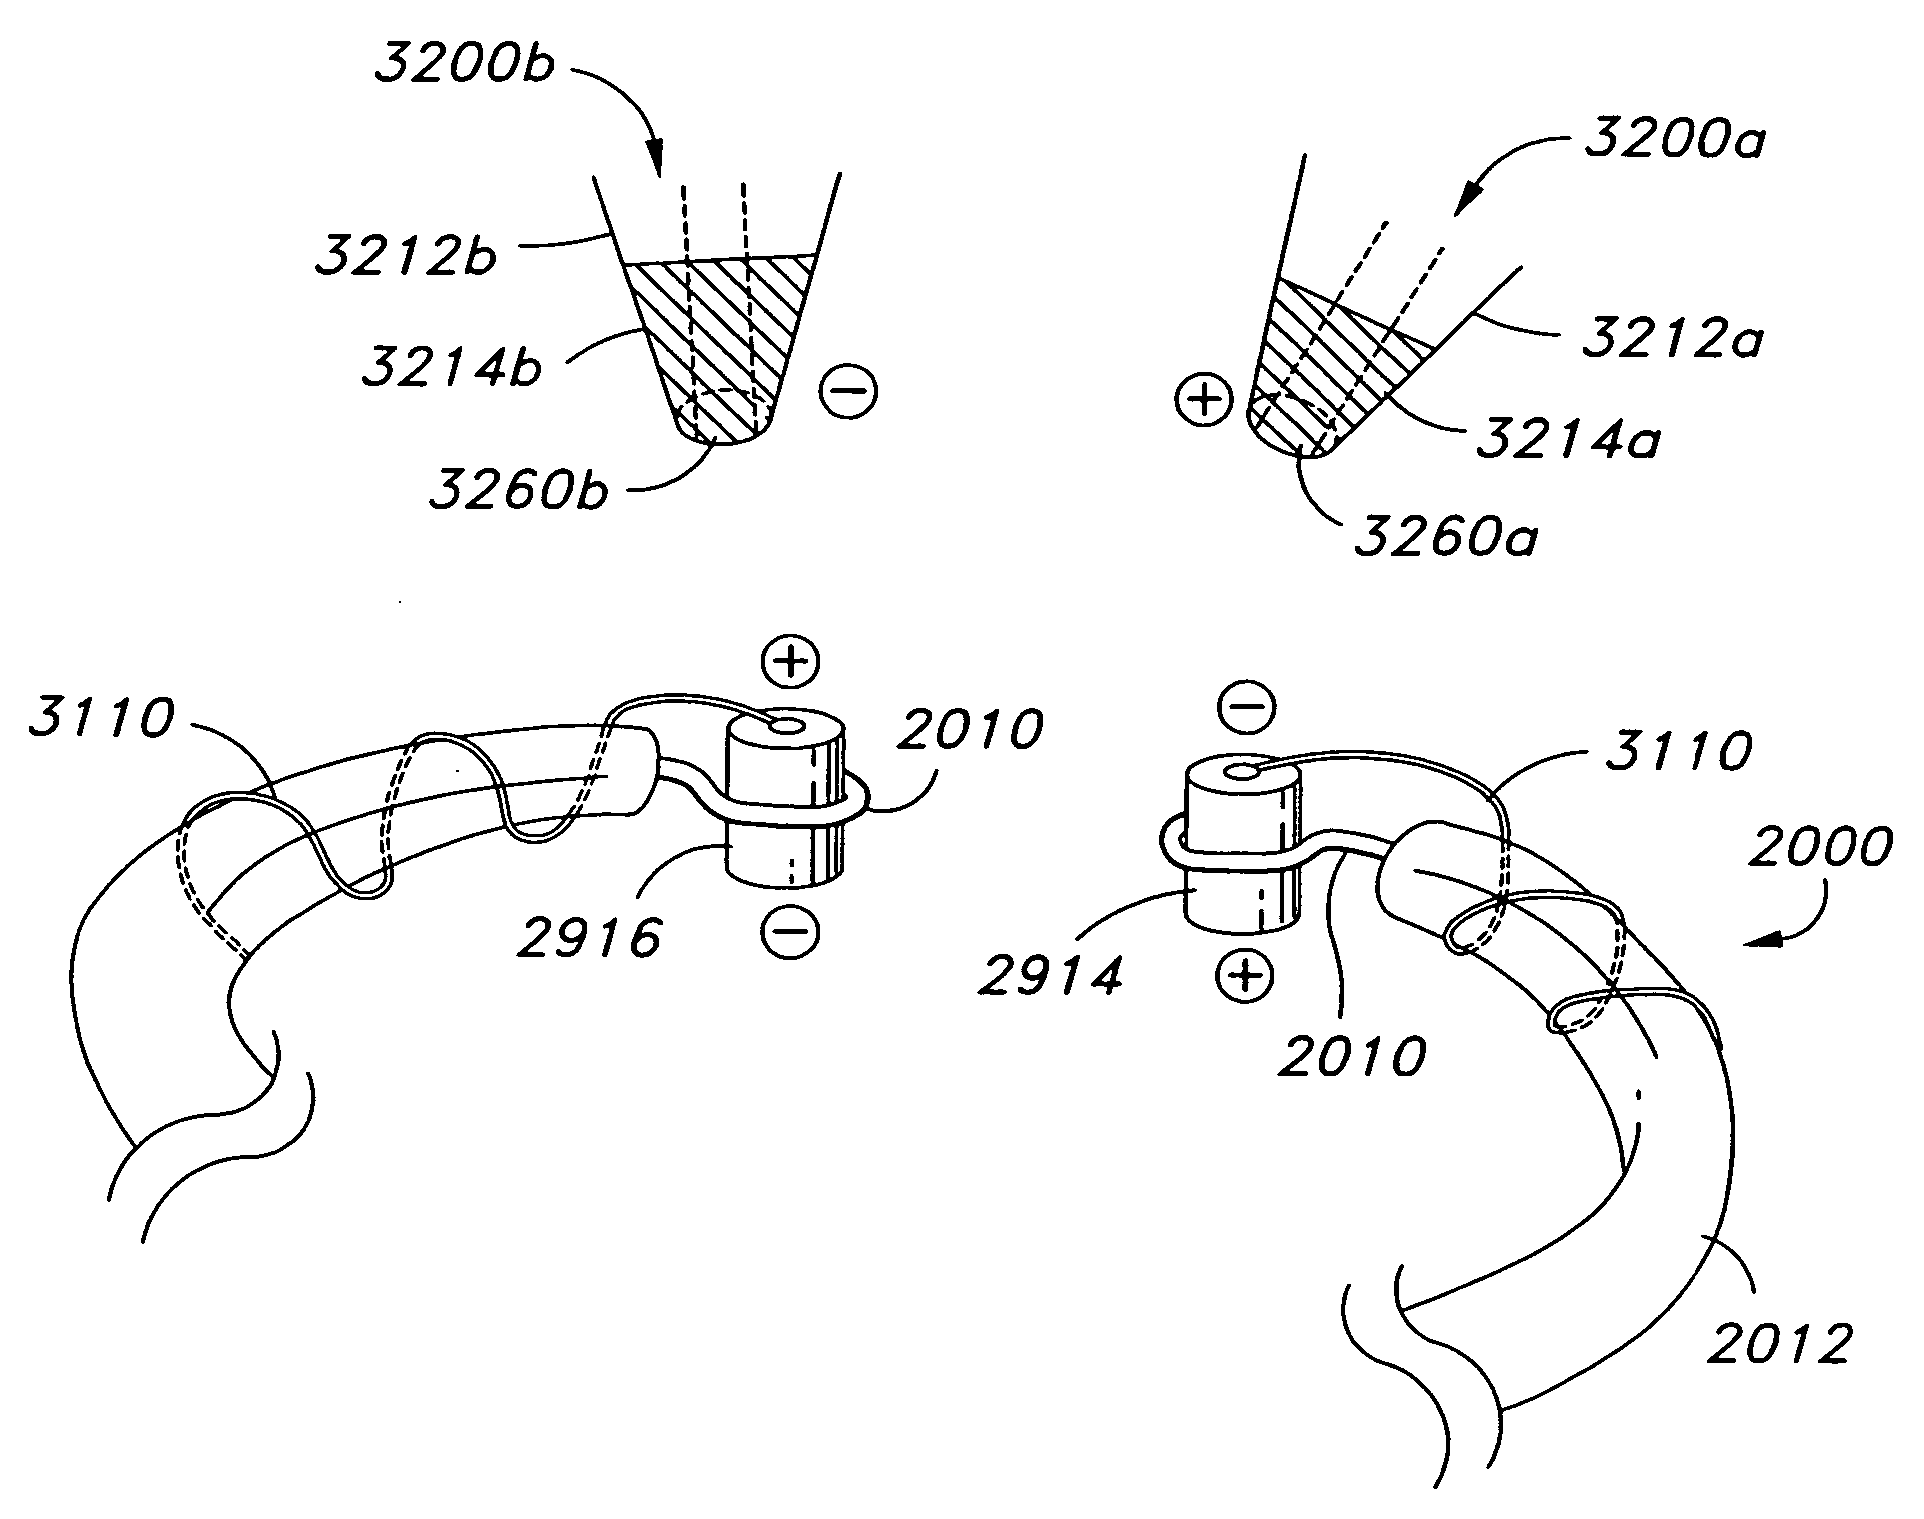 Magnetic engagement of catheter to implantable device